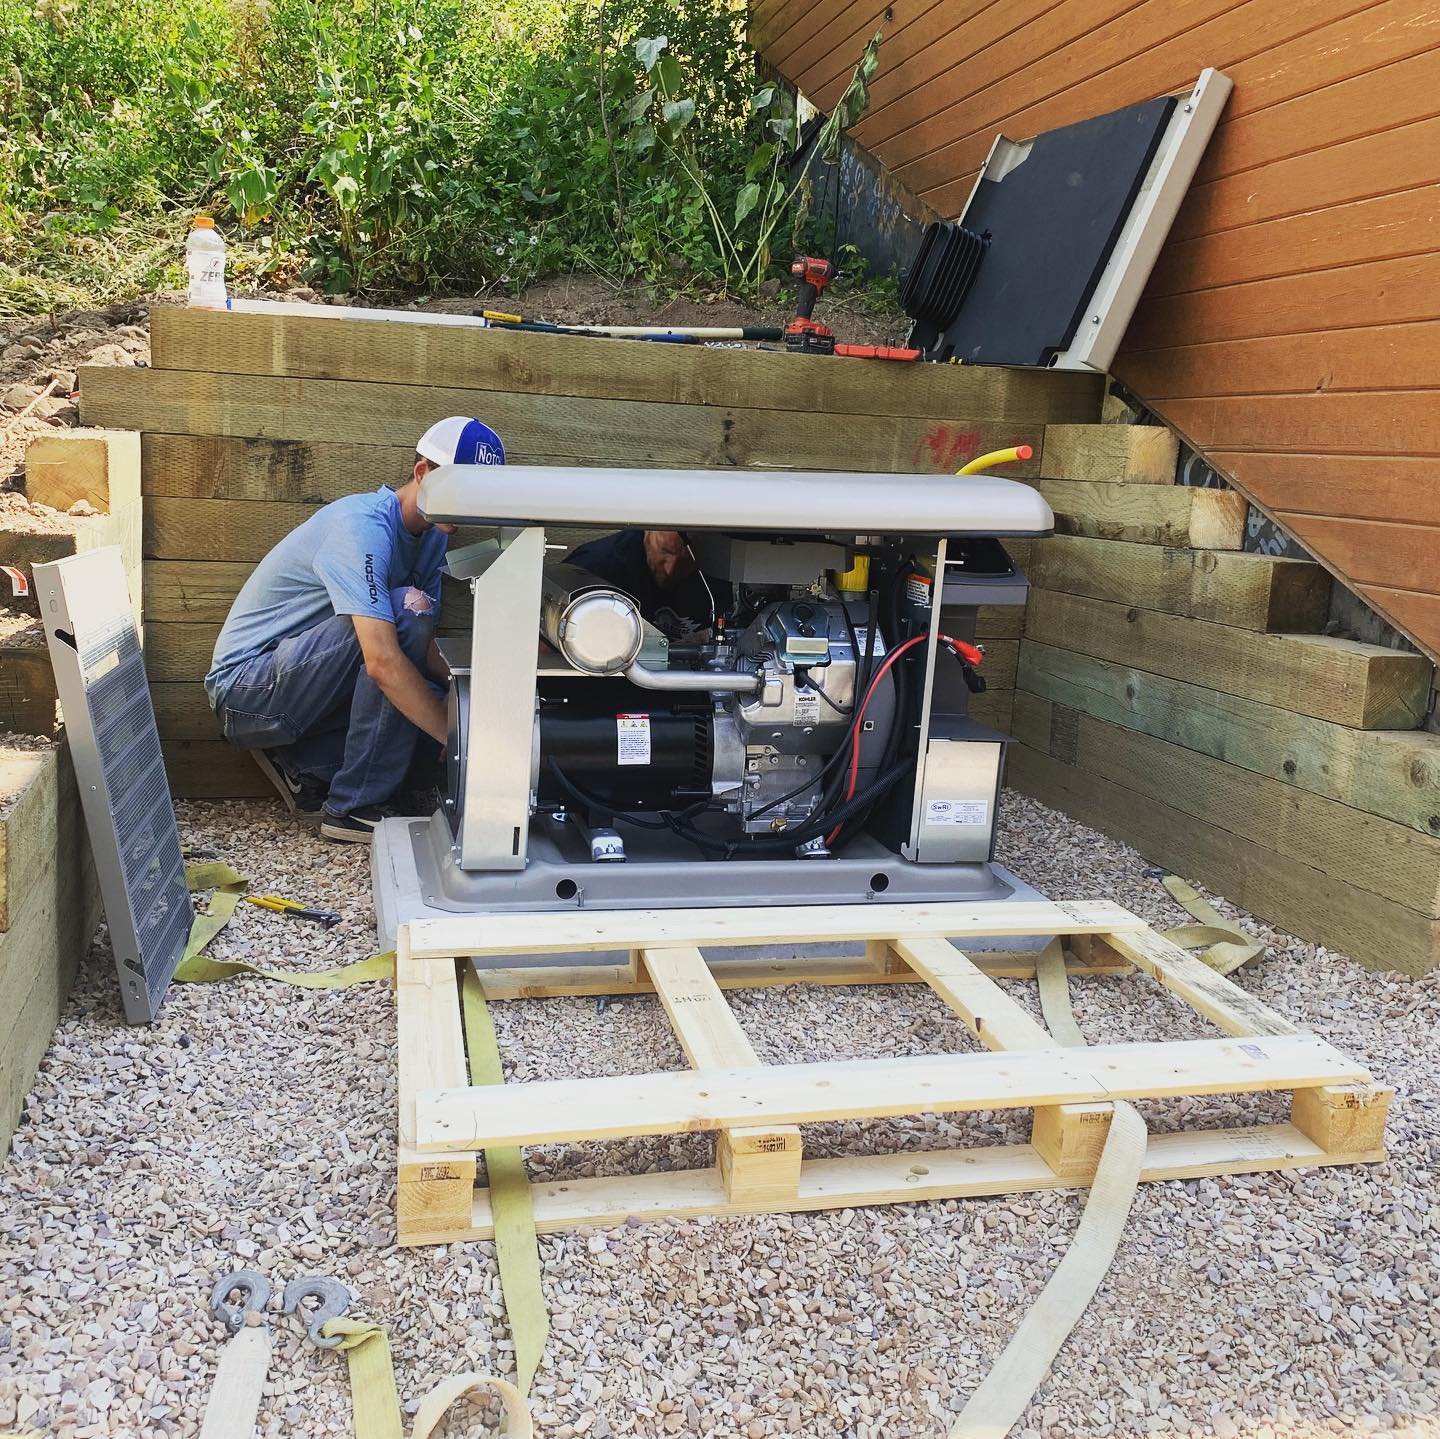 Installing a generator for home lighting